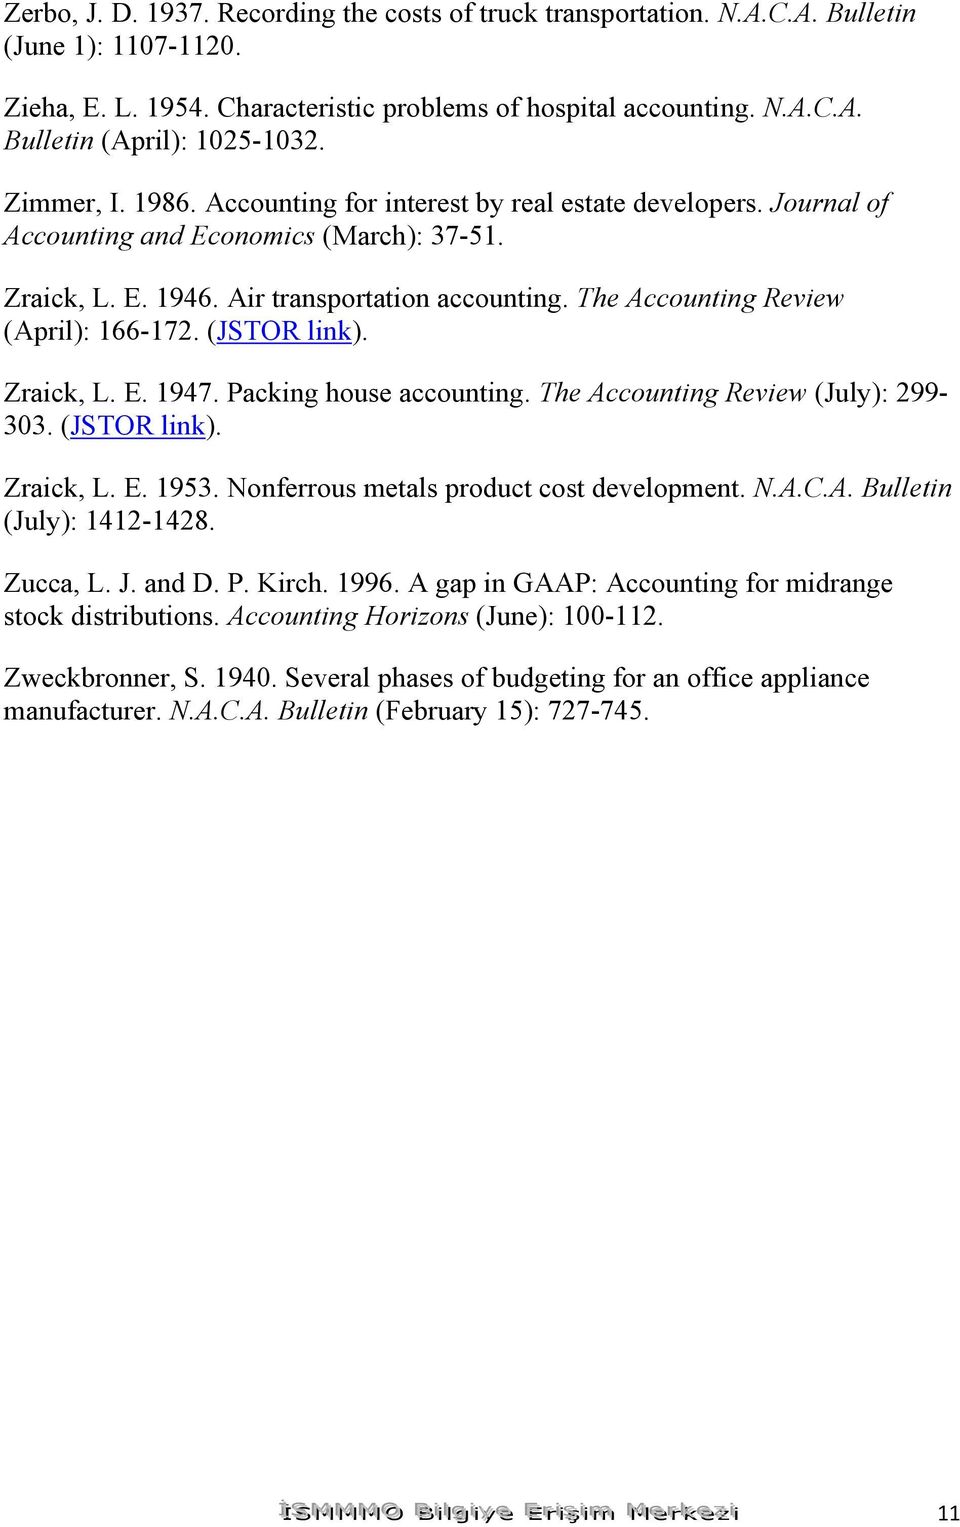 The Accounting Review (April): 166-172. (JSTOR link). Zraick, L. E. 1947. Packing house accounting. The Accounting Review (July): 299-303. (JSTOR link). Zraick, L. E. 1953.